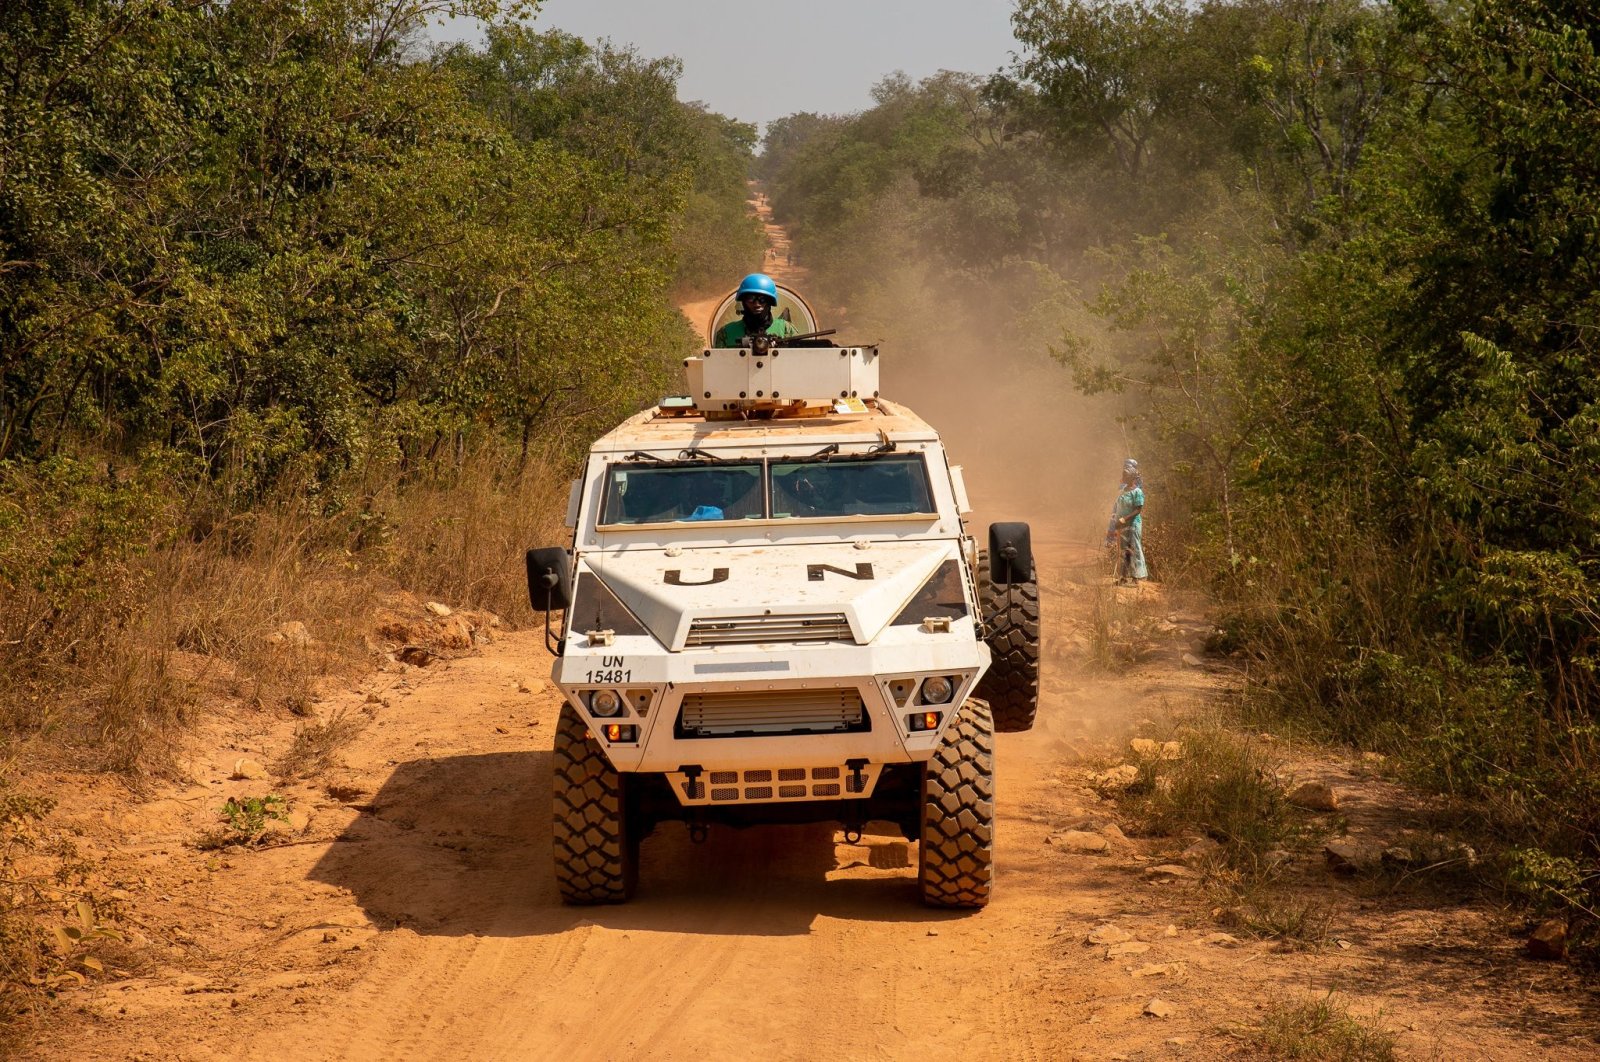 A United Nations armored personnel carrier patrols on a supposedly safe road, avoiding roads with possible explosive devices on them, in Paoua, Central African Republic, on Dec. 5, 2021. (Photo by Barbara DEBOUT / AFP)